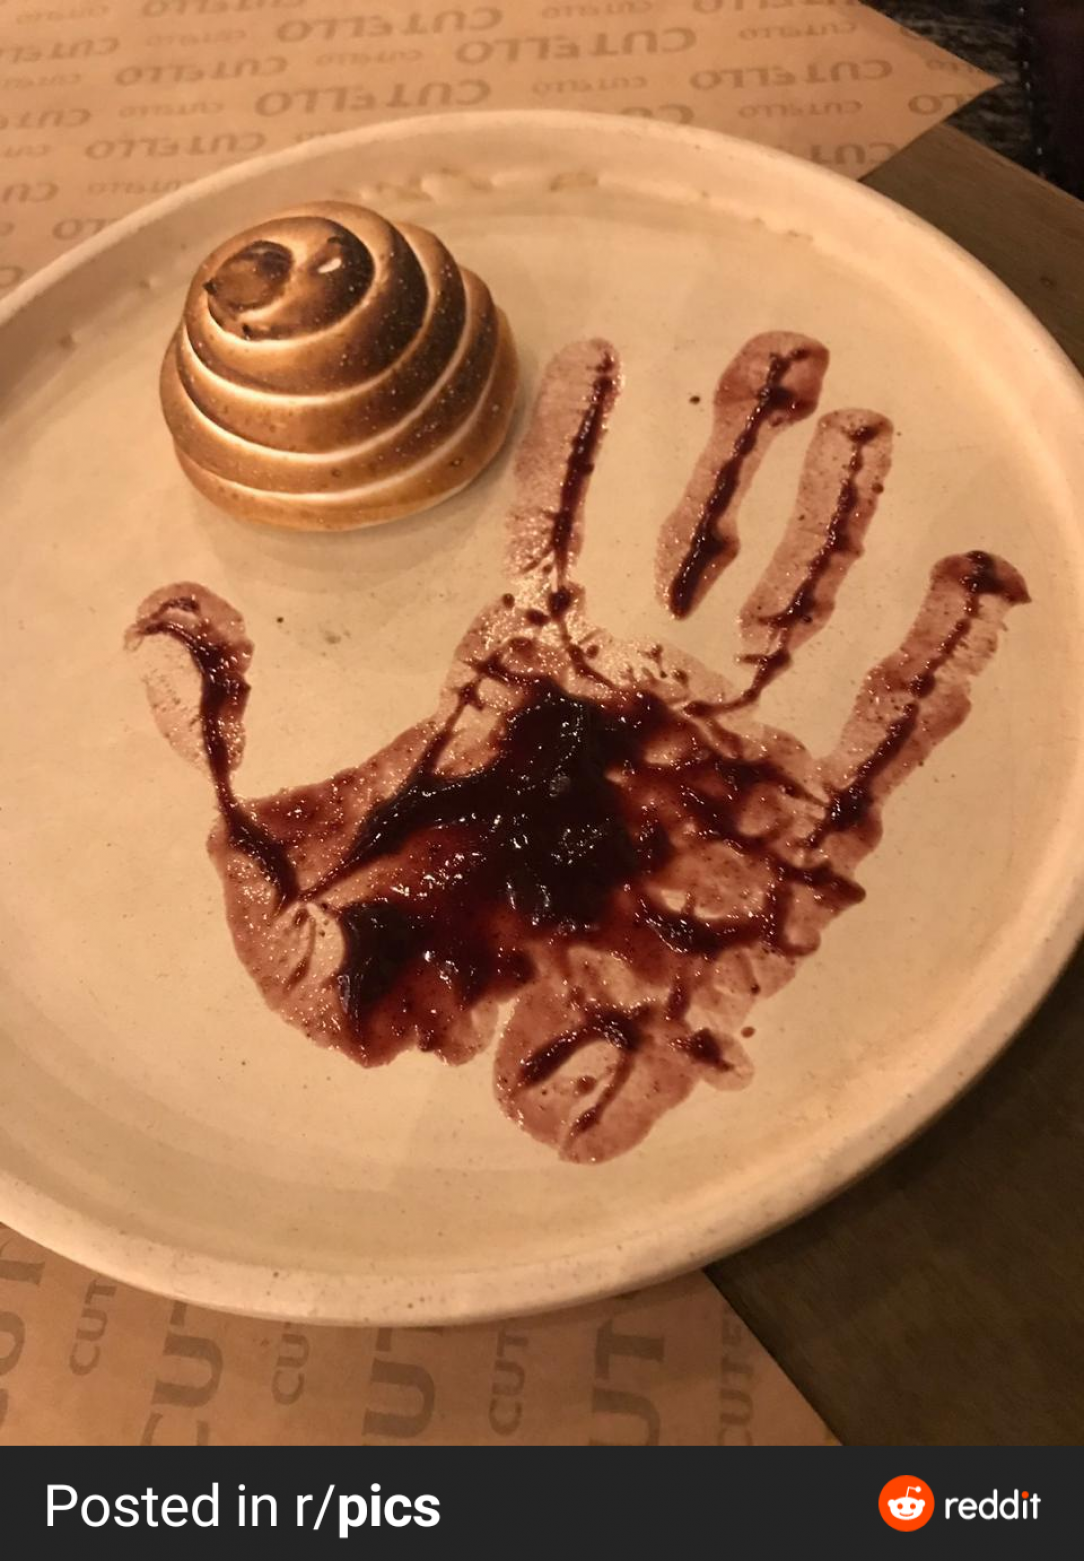 A high end restaurants take on &quot;a handful of jam&quot; not oc